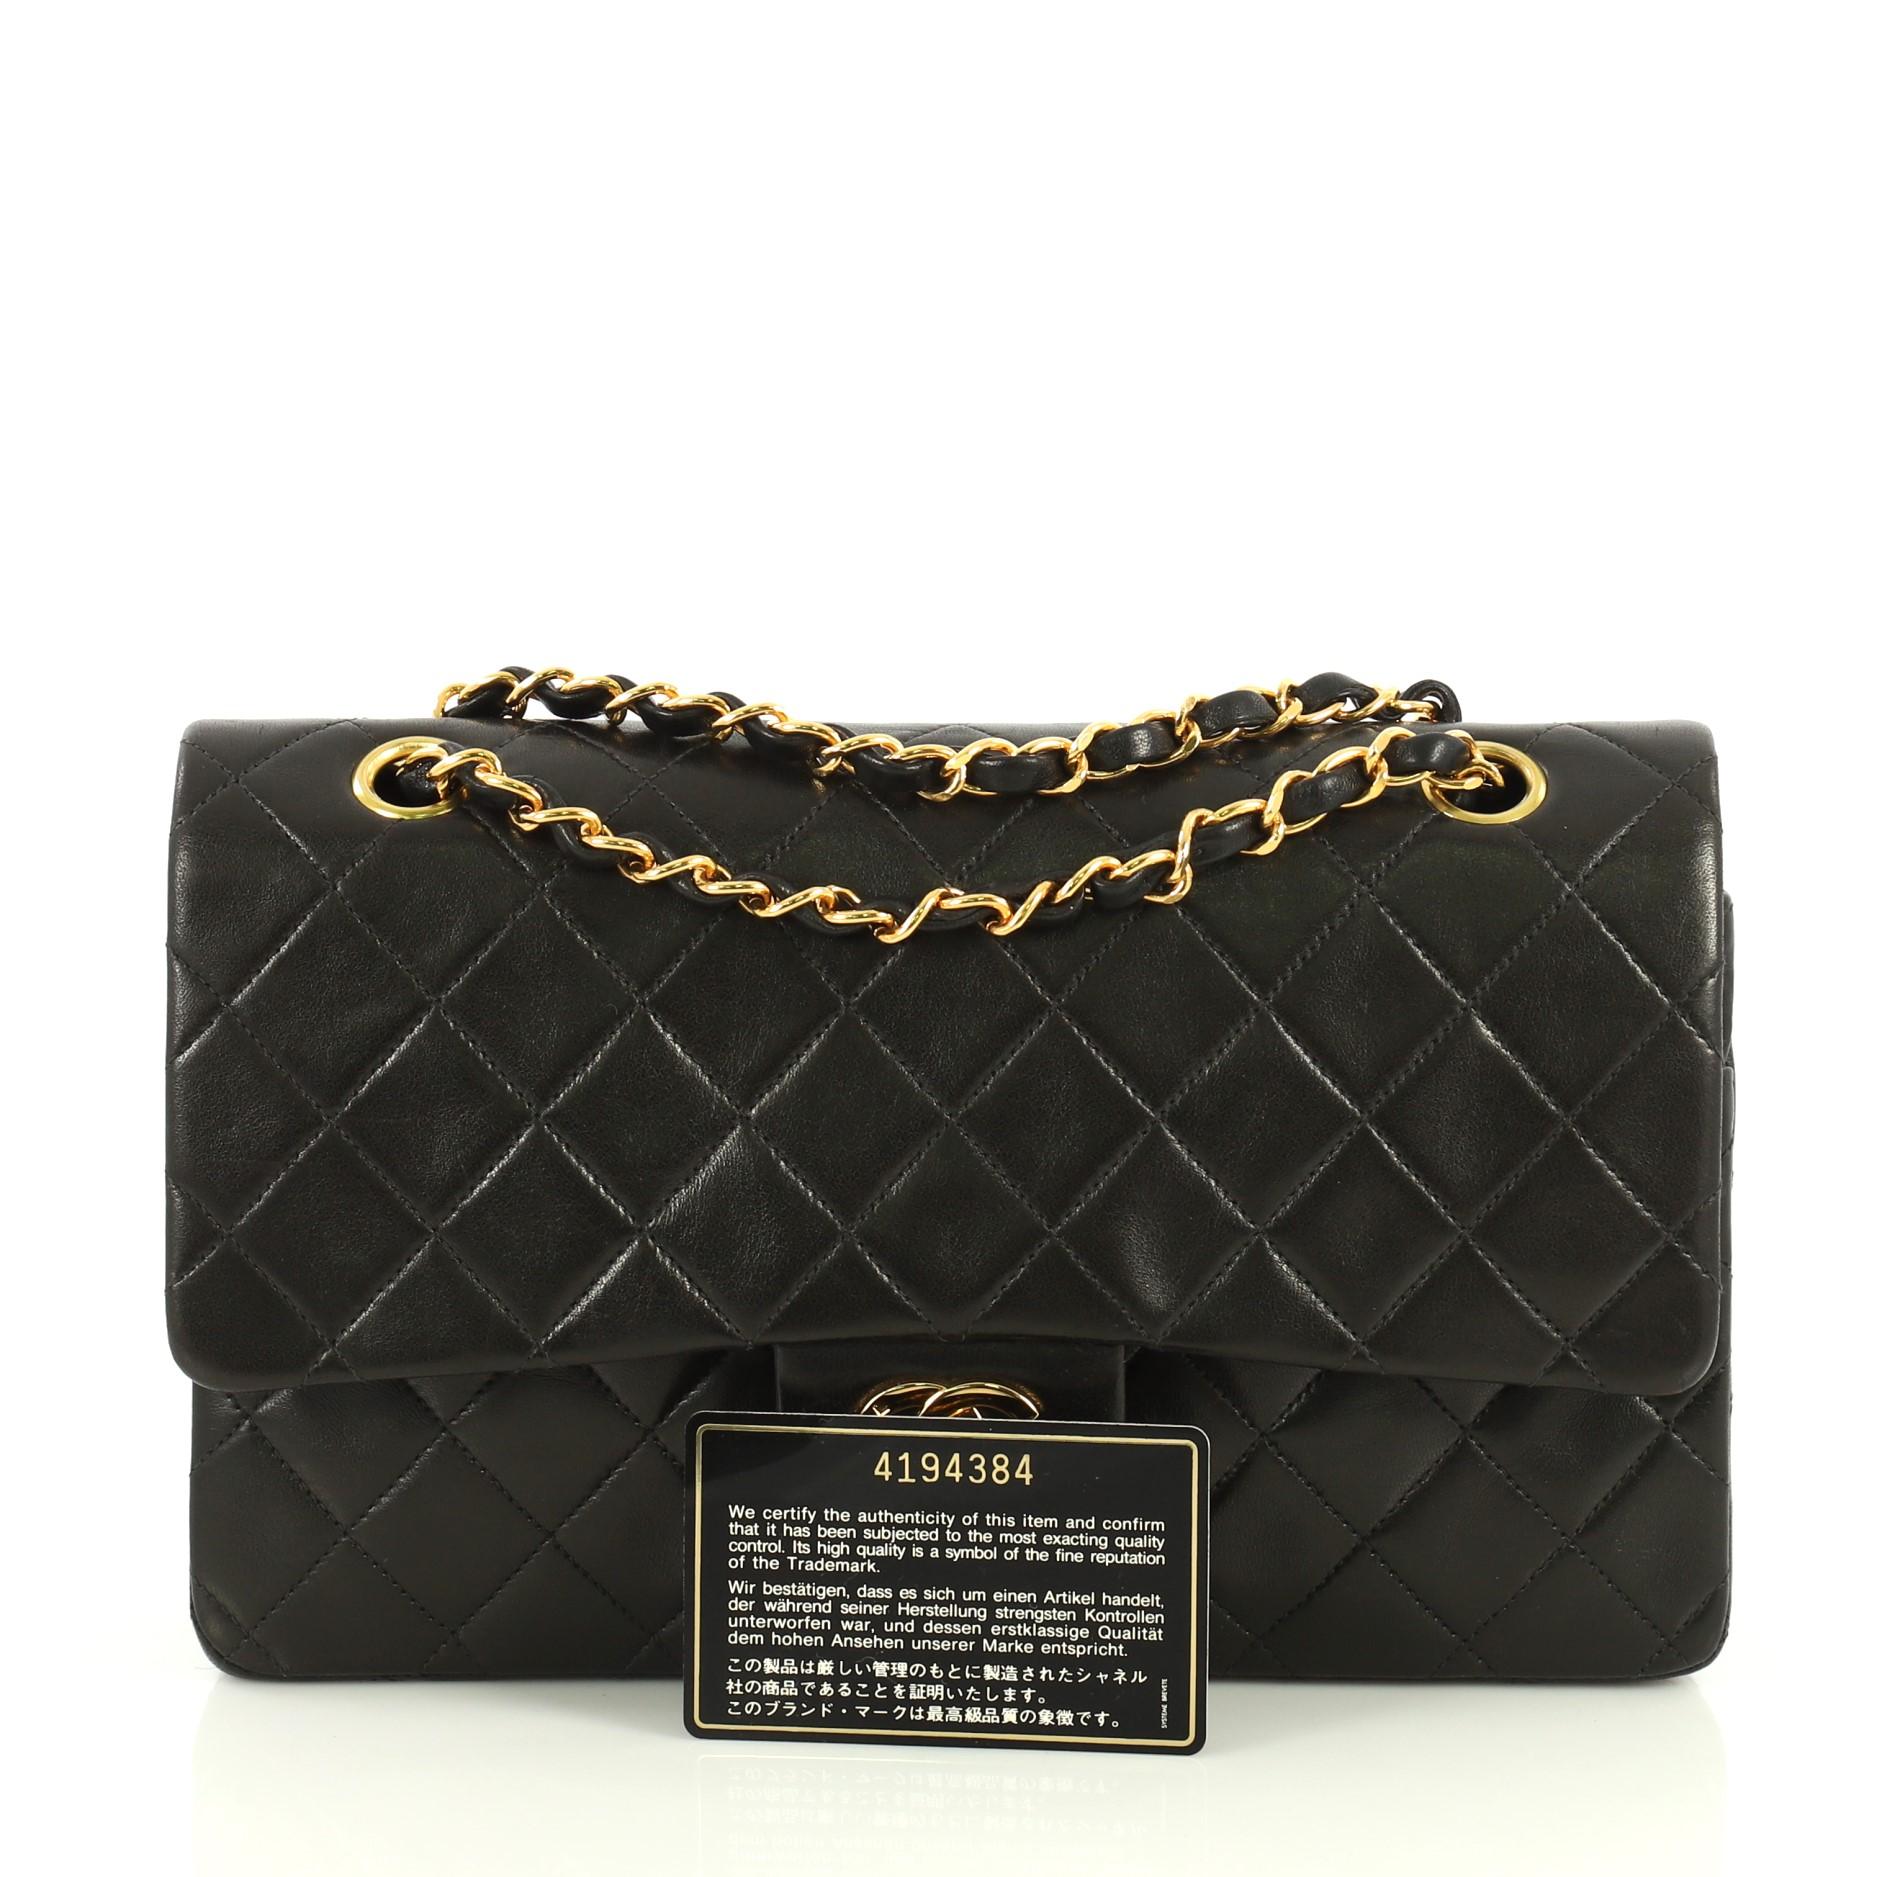 This Chanel Vintage Classic Double Flap Bag Quilted Lambskin Medium, crafted from black quilted lambskin leather, features woven-in leather chain strap, exterior back slip pocket and gold-tone hardware. Its frontal CC turn-lock closure opens to a